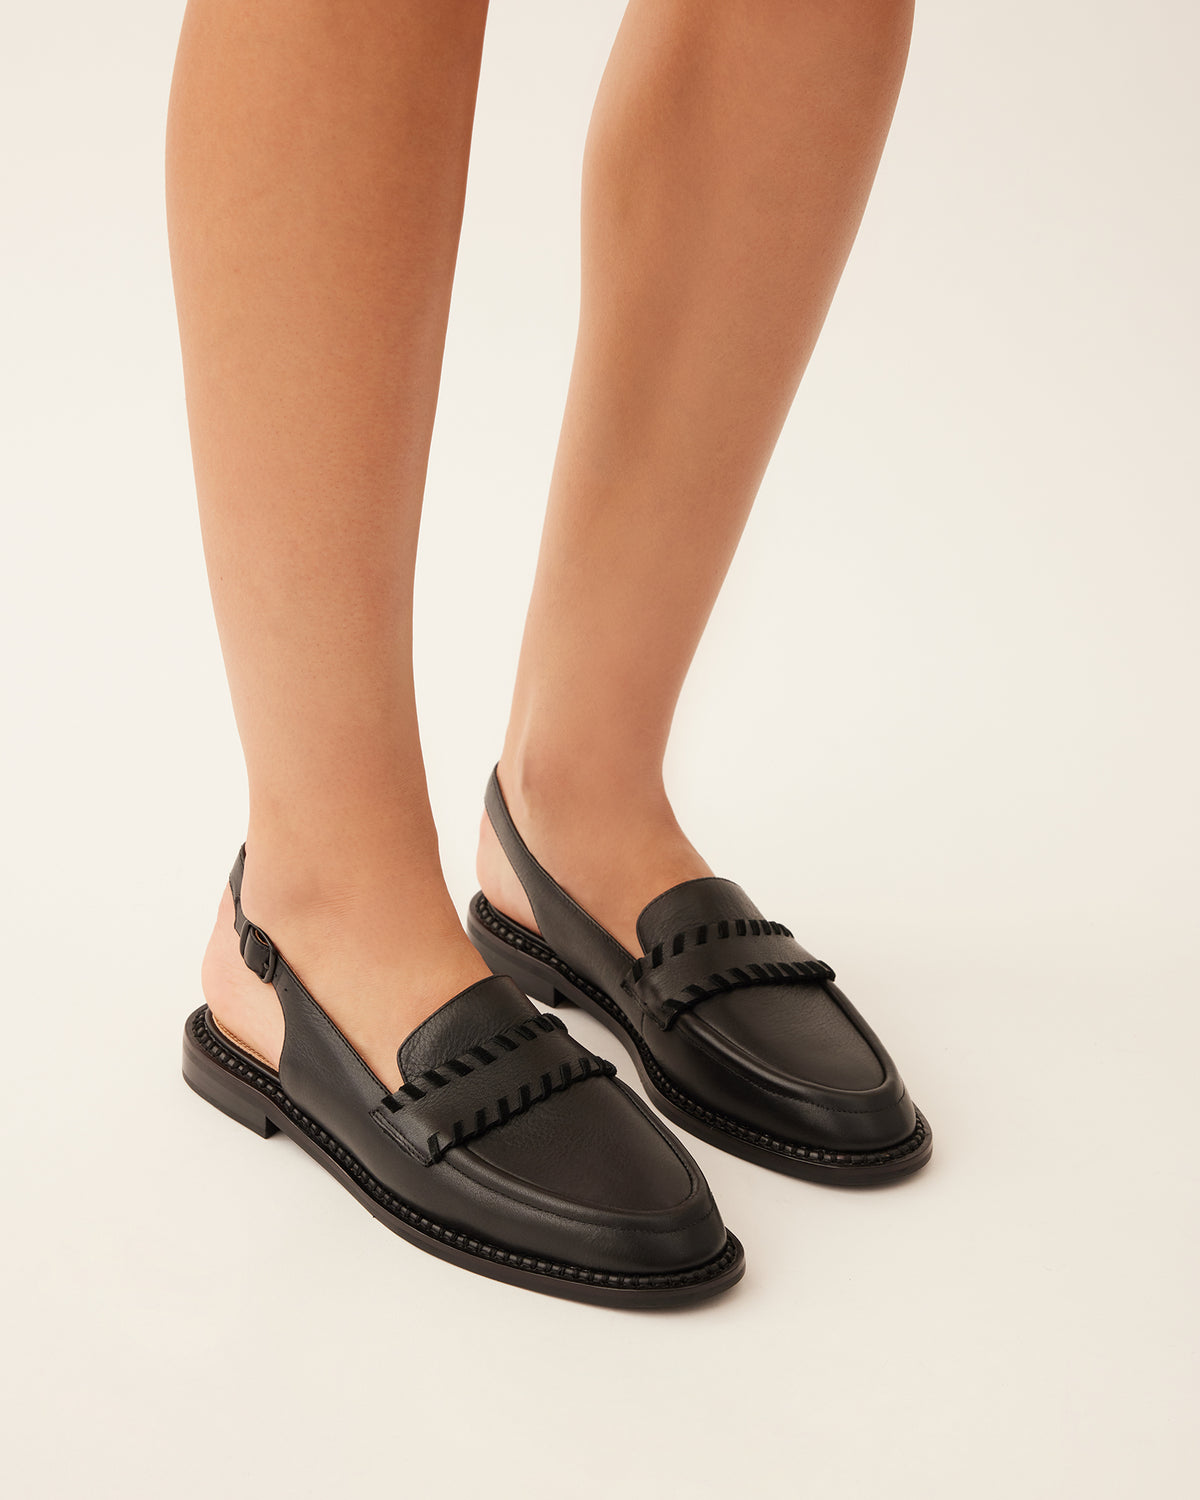 DAHLIA LOAFERS BLACK LEATHER